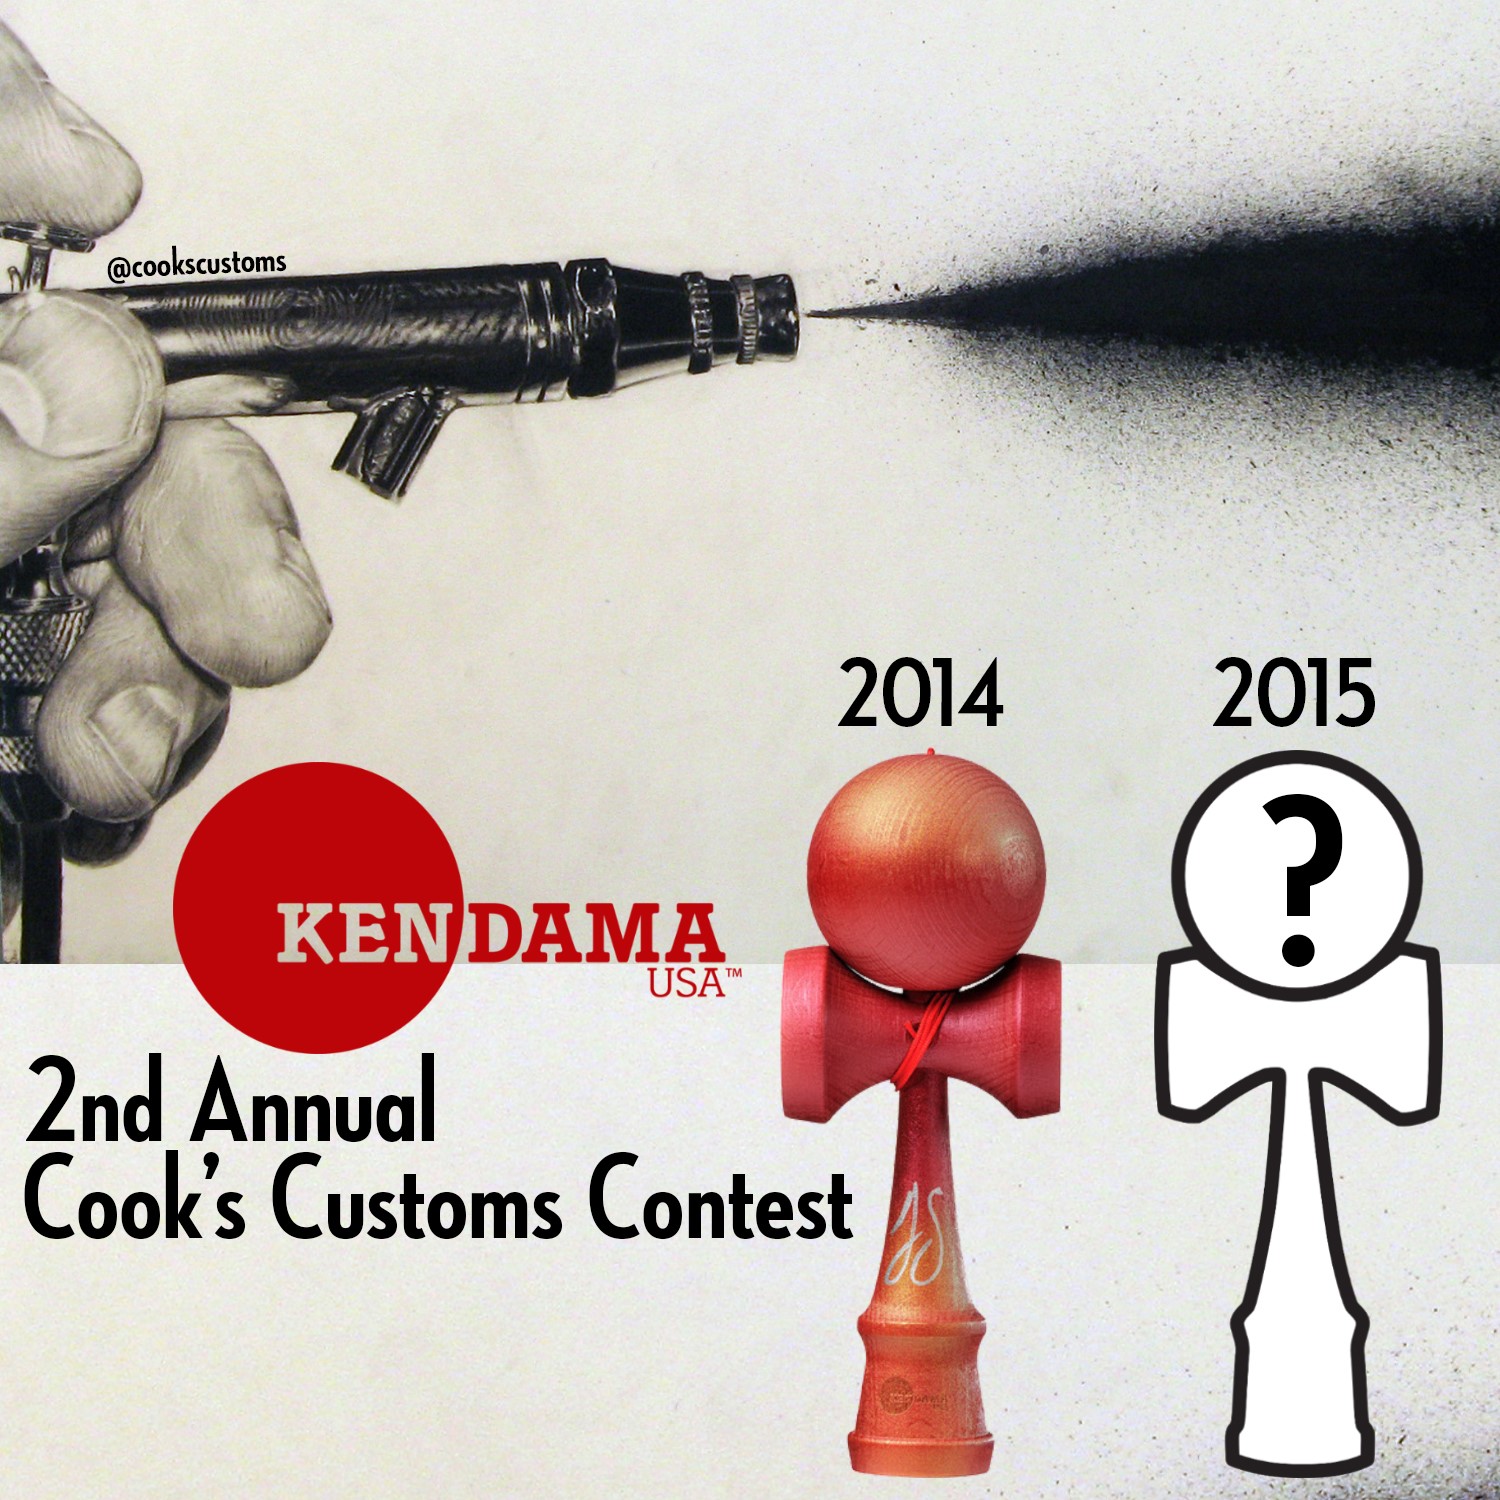 2nd Annual Cook's Customs Contest 2015